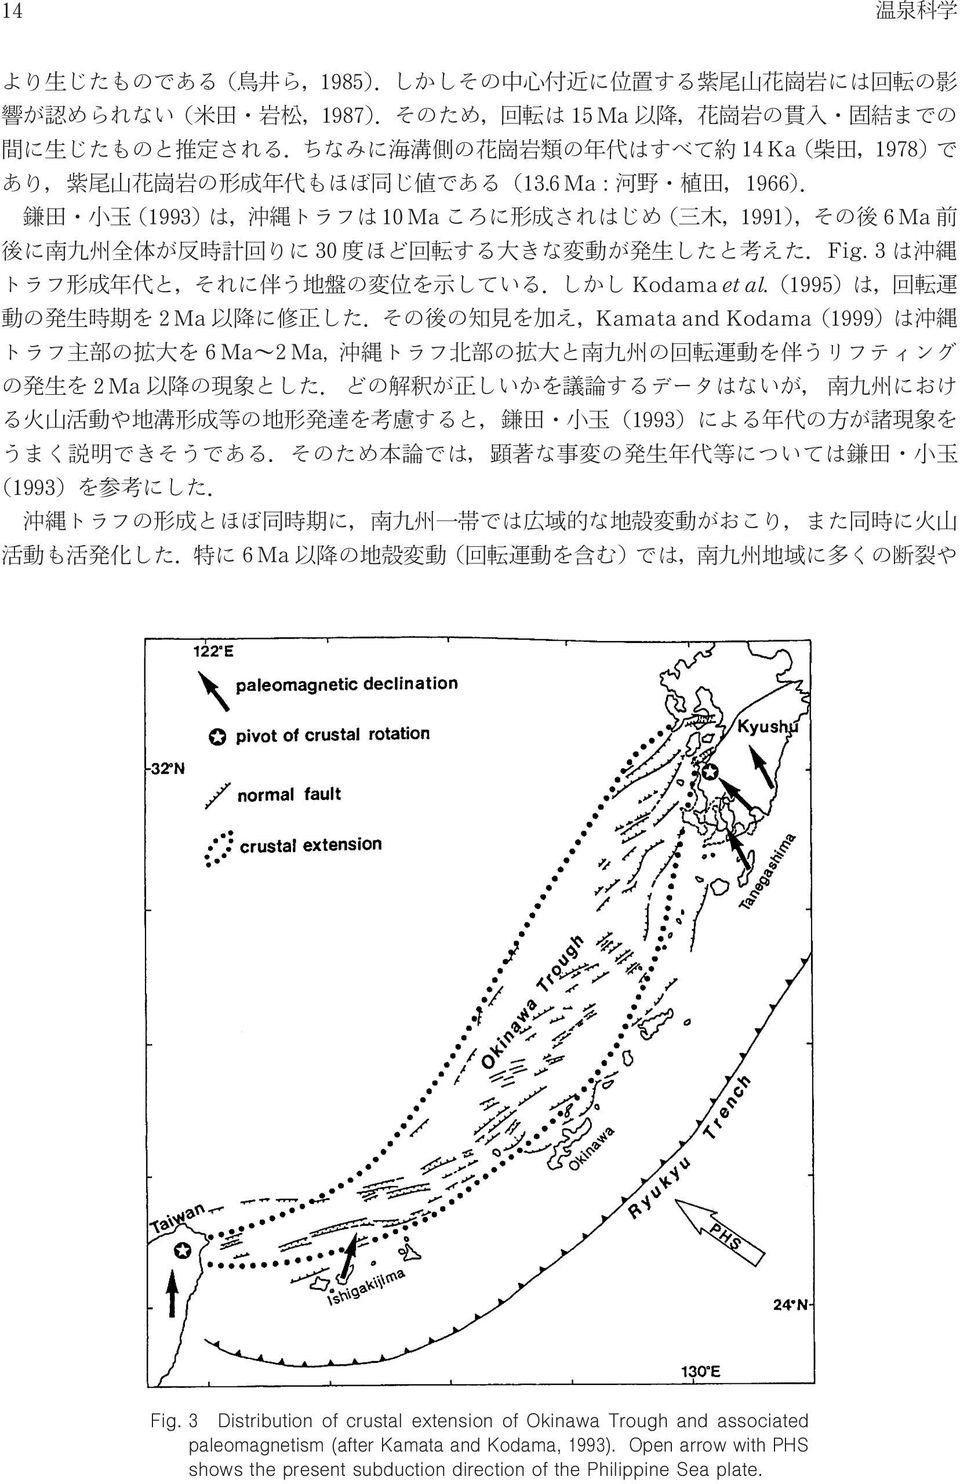 - Distribution of crustal extension of Okinawa Trough and associated paleomagnetism